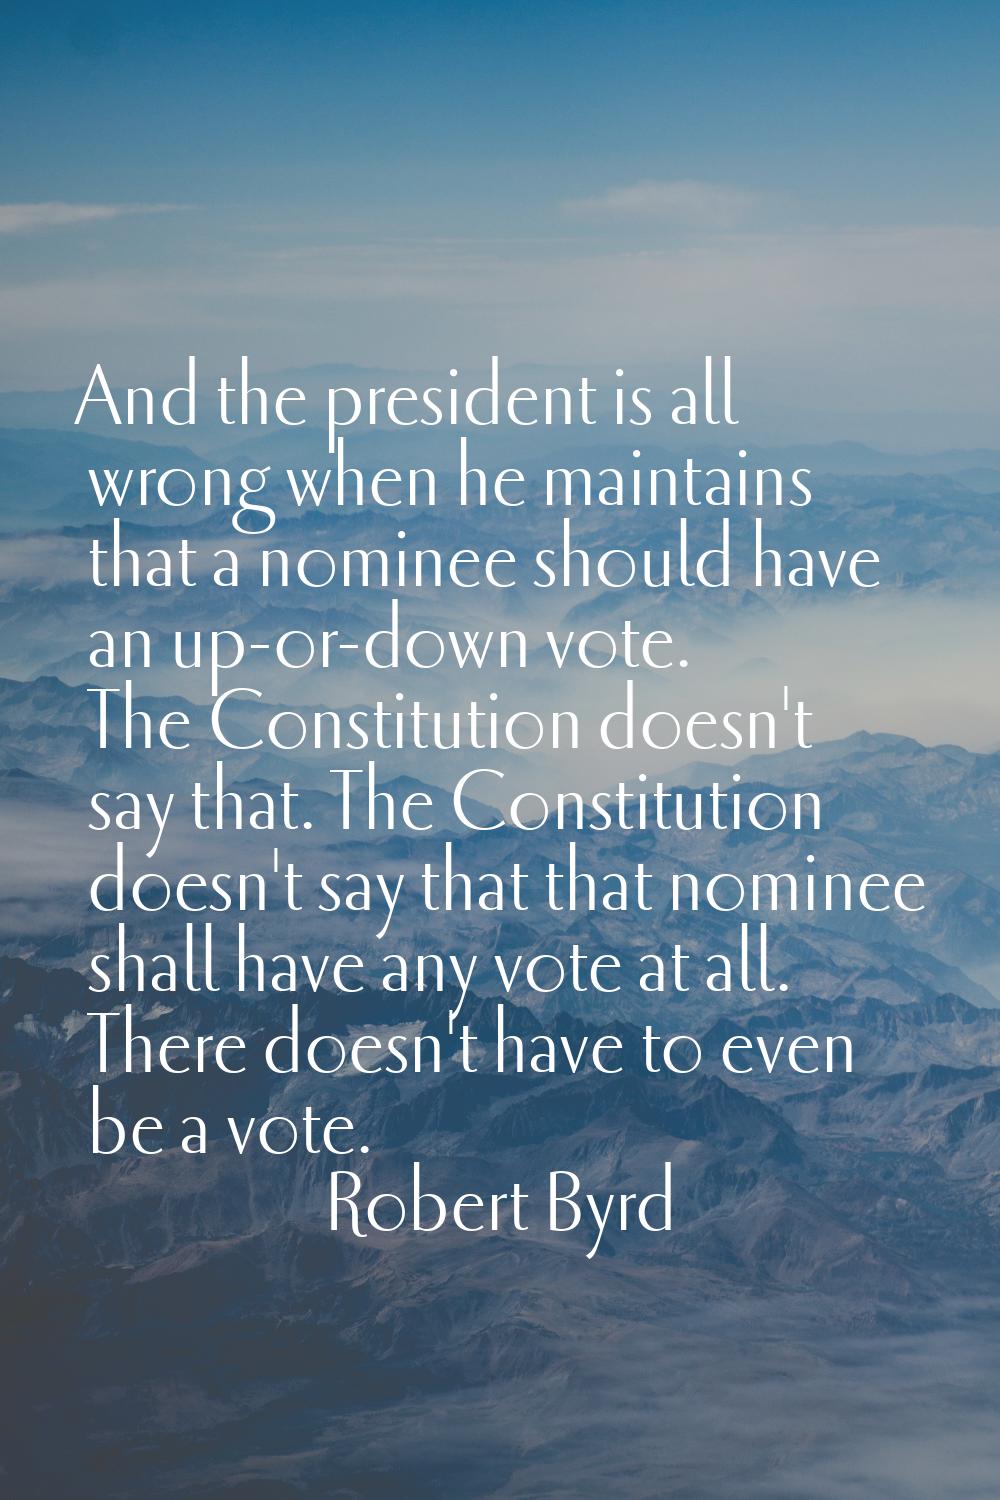 And the president is all wrong when he maintains that a nominee should have an up-or-down vote. The